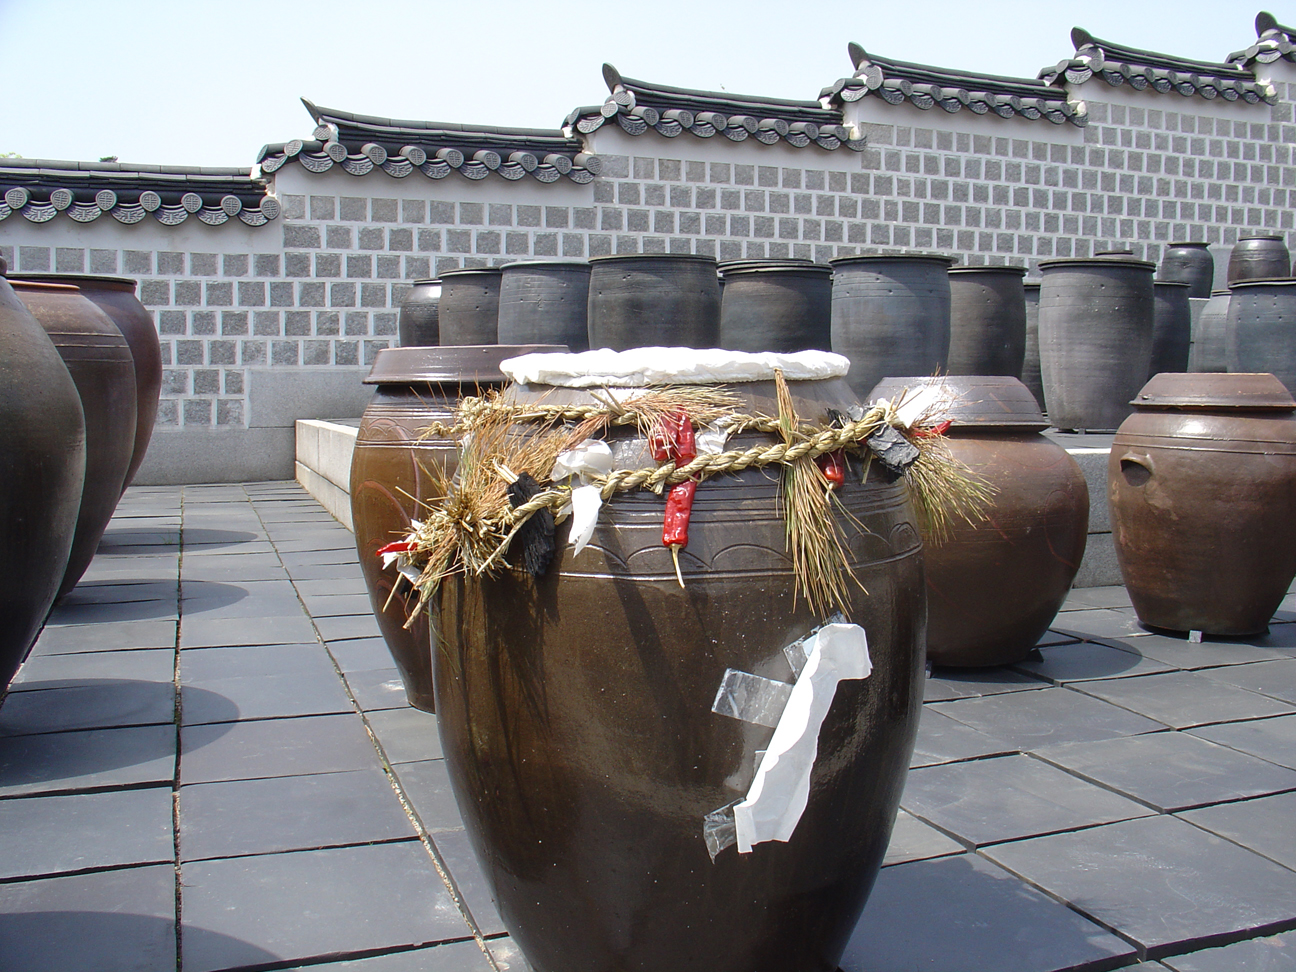 Jars that were used to store Kimchi during the year.